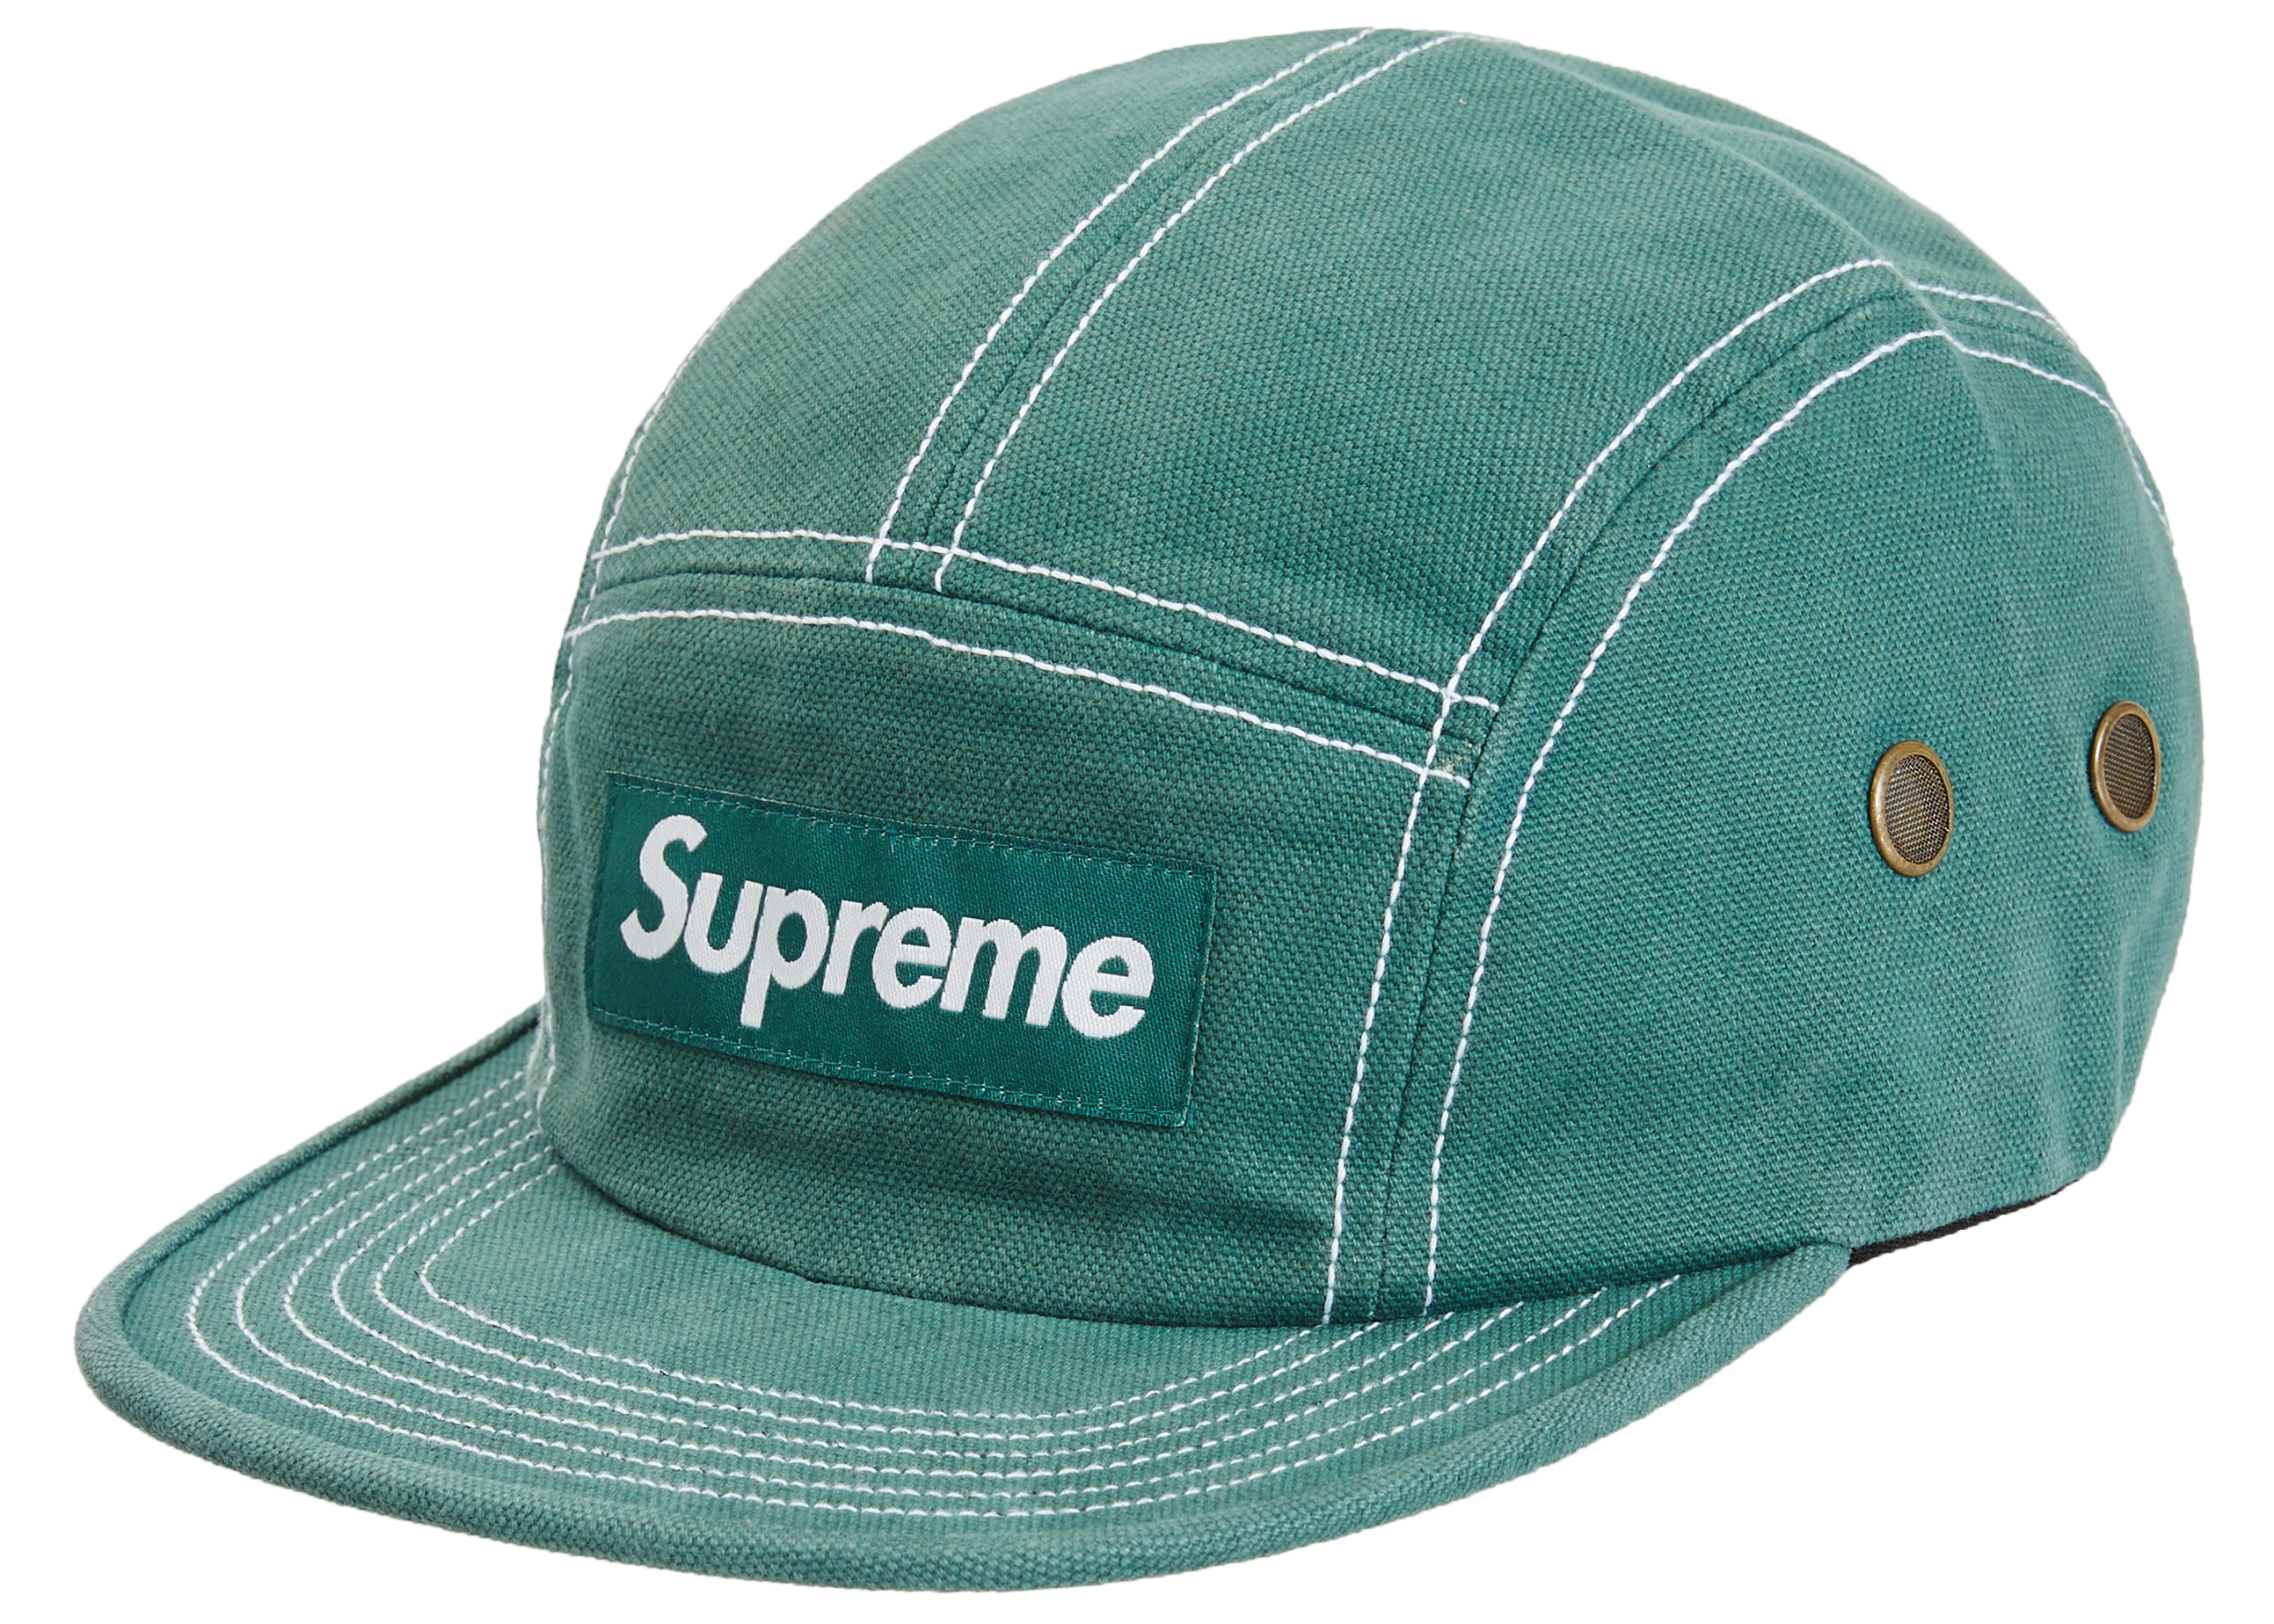 Supreme Field Camp Cap 20SS OUR's モーガン蔵人 - キャップ